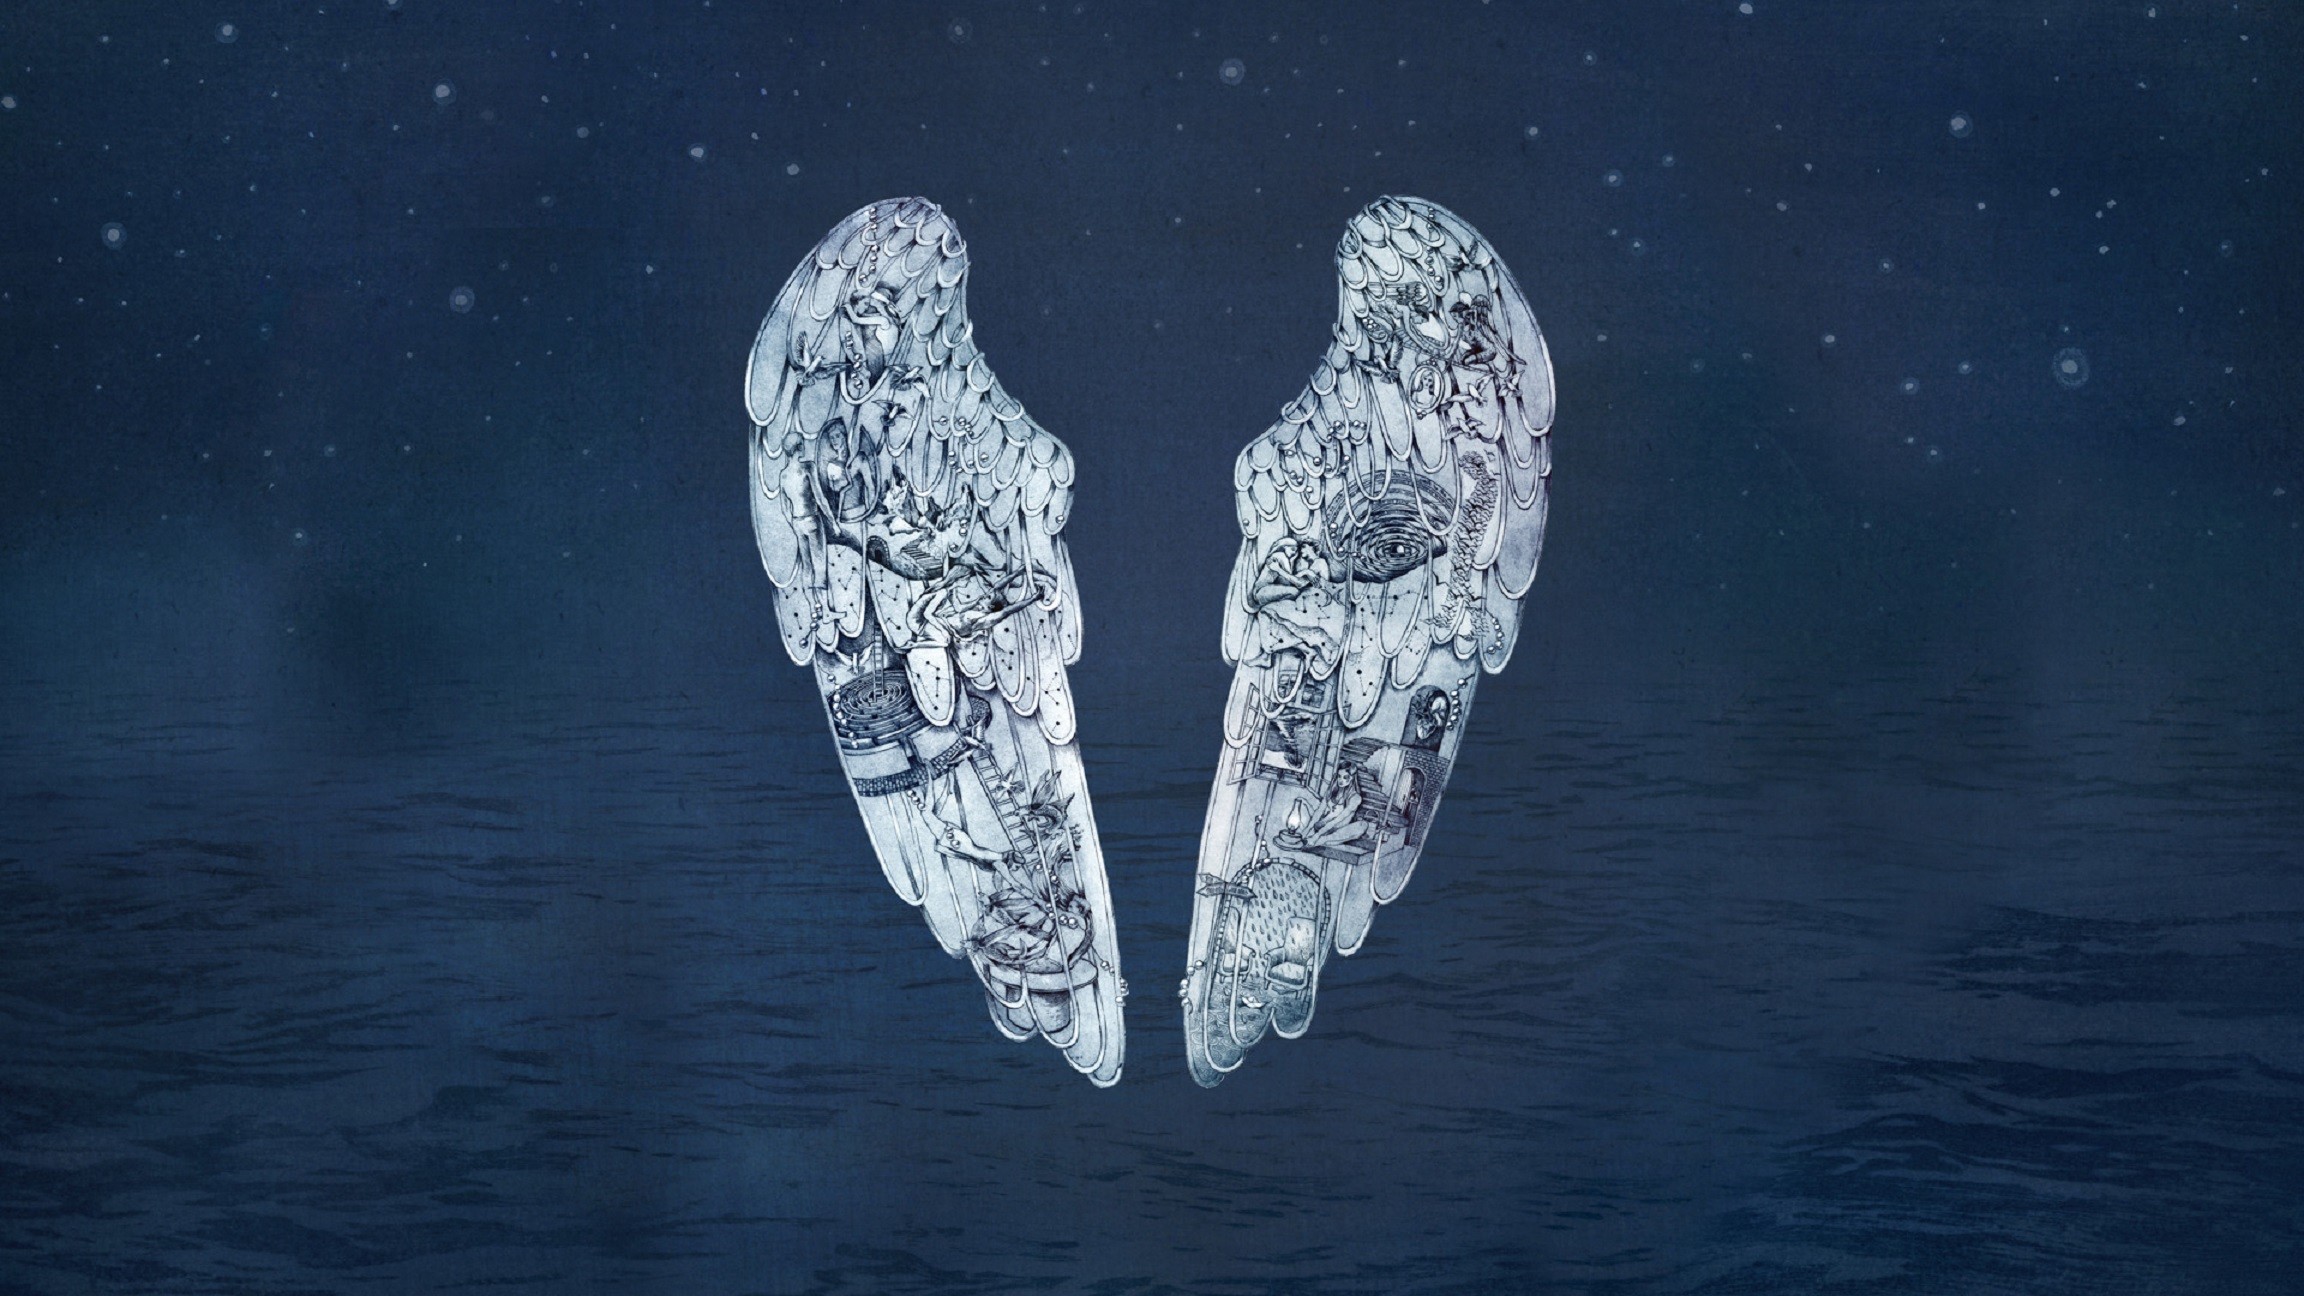 2304x1296 x Made a few wallpapers for Ghost Stories as a Photoshop | HD Wallpapers |  Pinterest | Coldplay, Wallpaper and Hd wallpaper